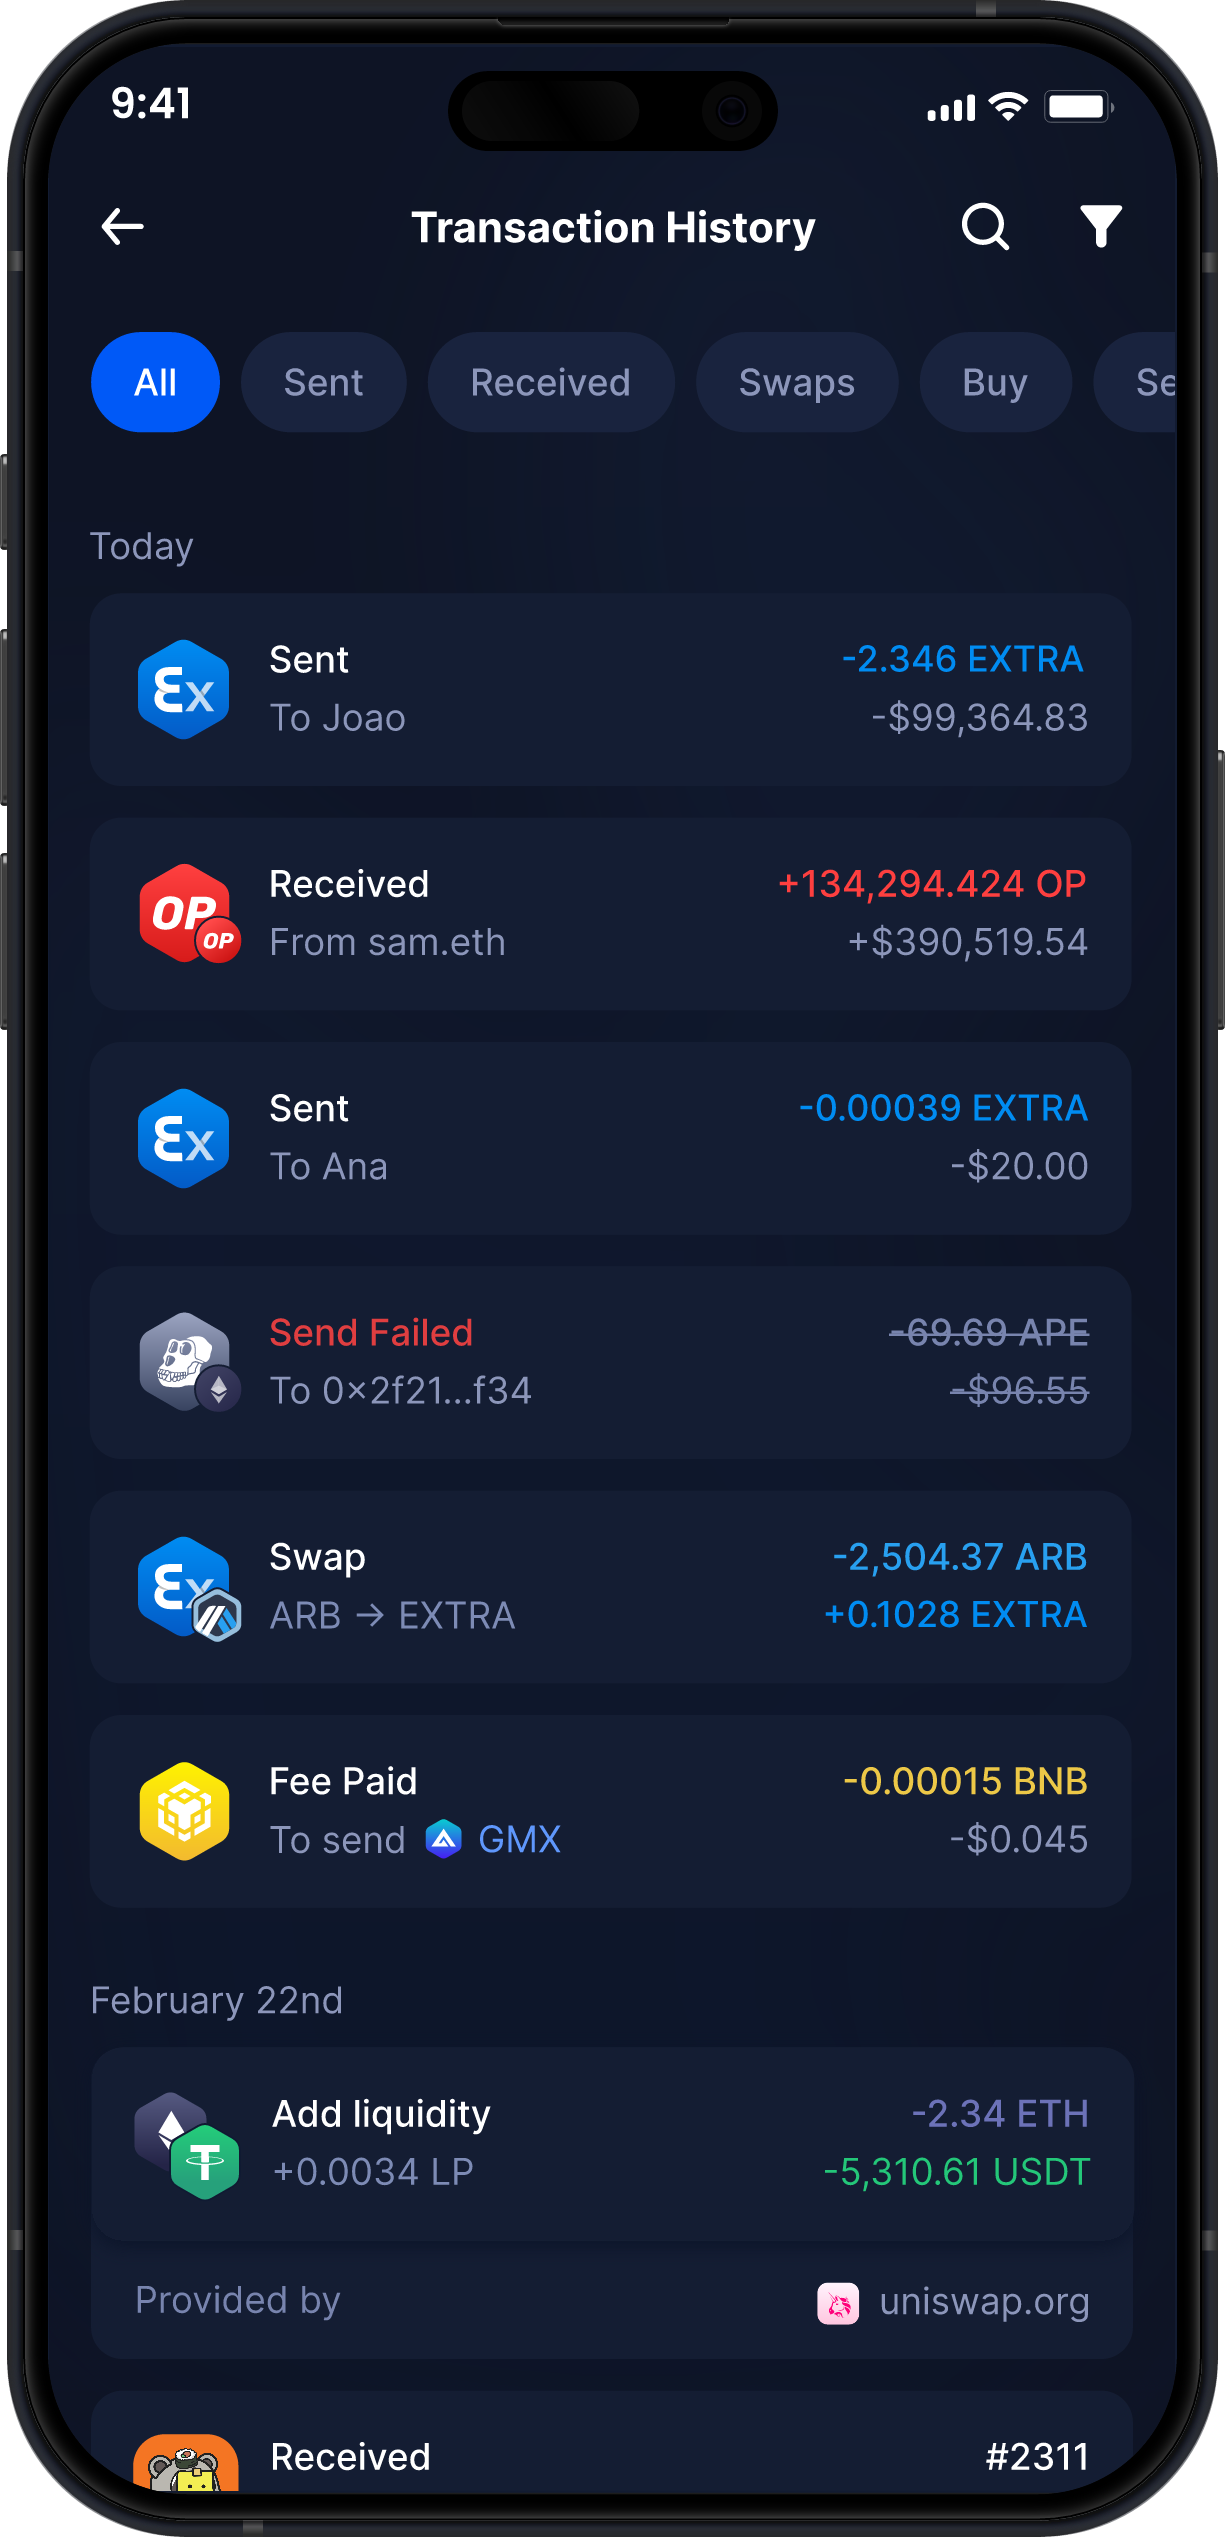 Infinity Mobile Extra Finance Wallet - Complete EXTRA Transaction History